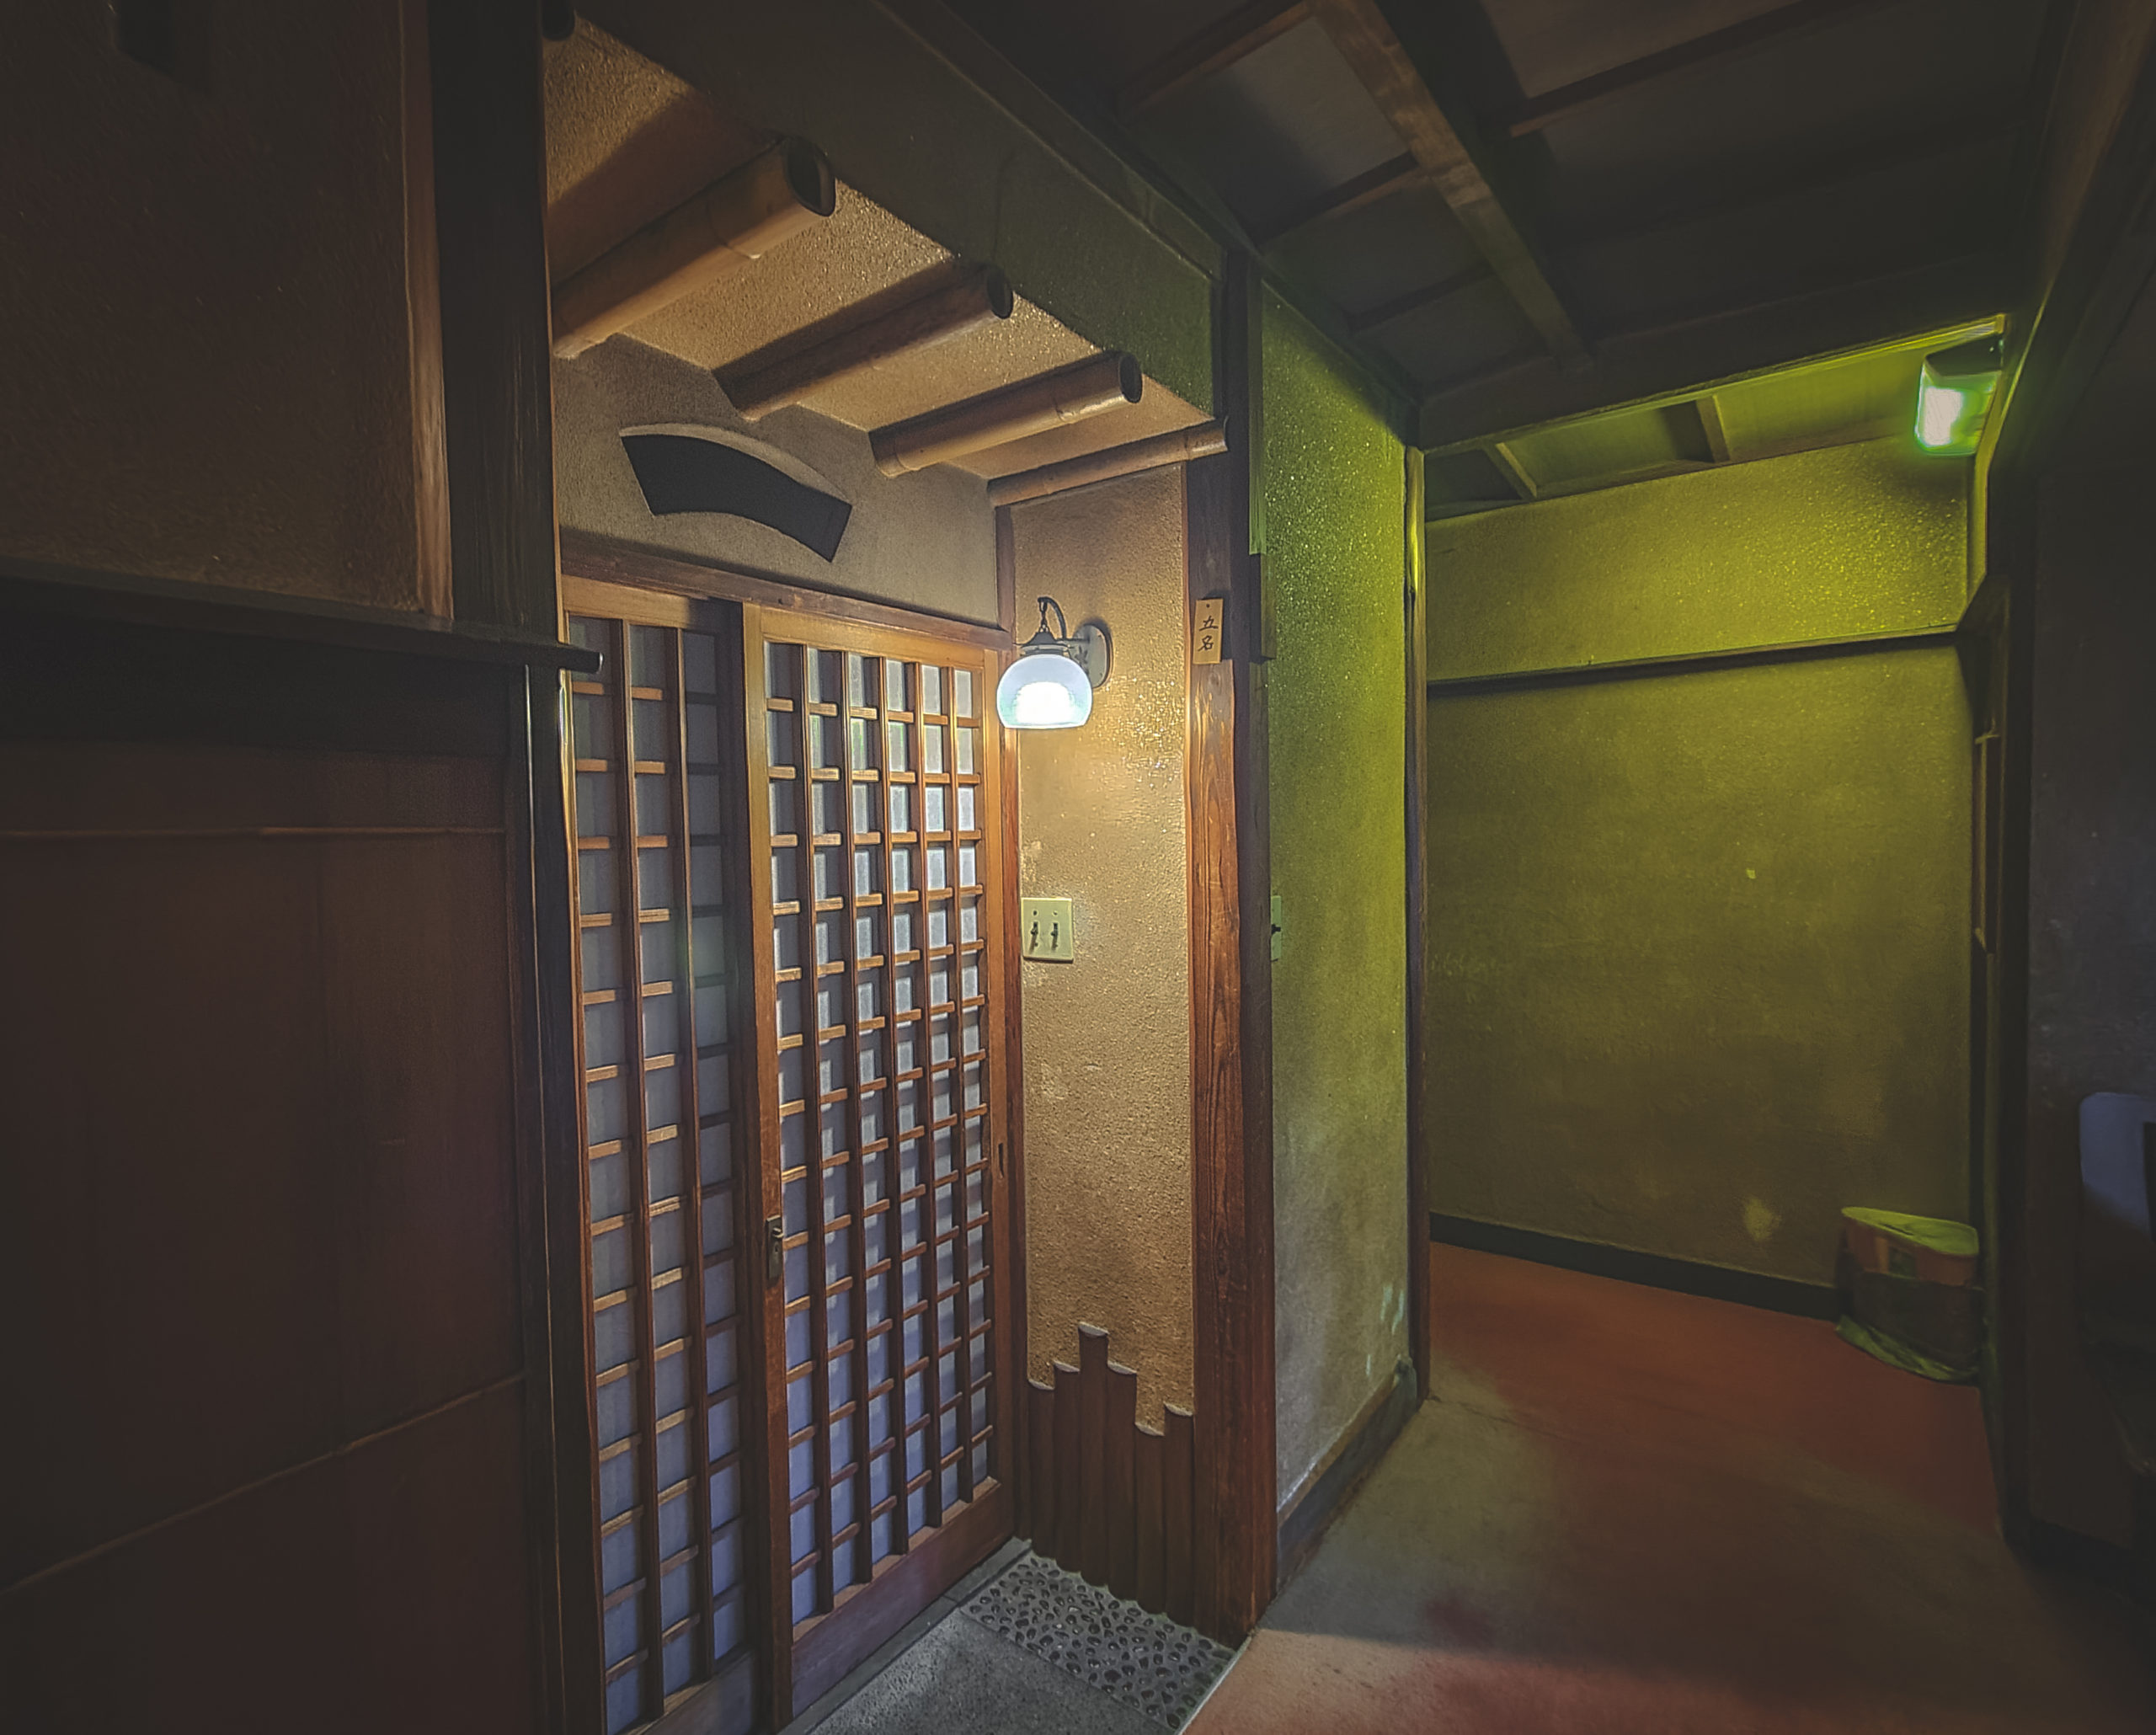 The entrance to one of the guest rooms—this architecture style is not usually found in ryokan 